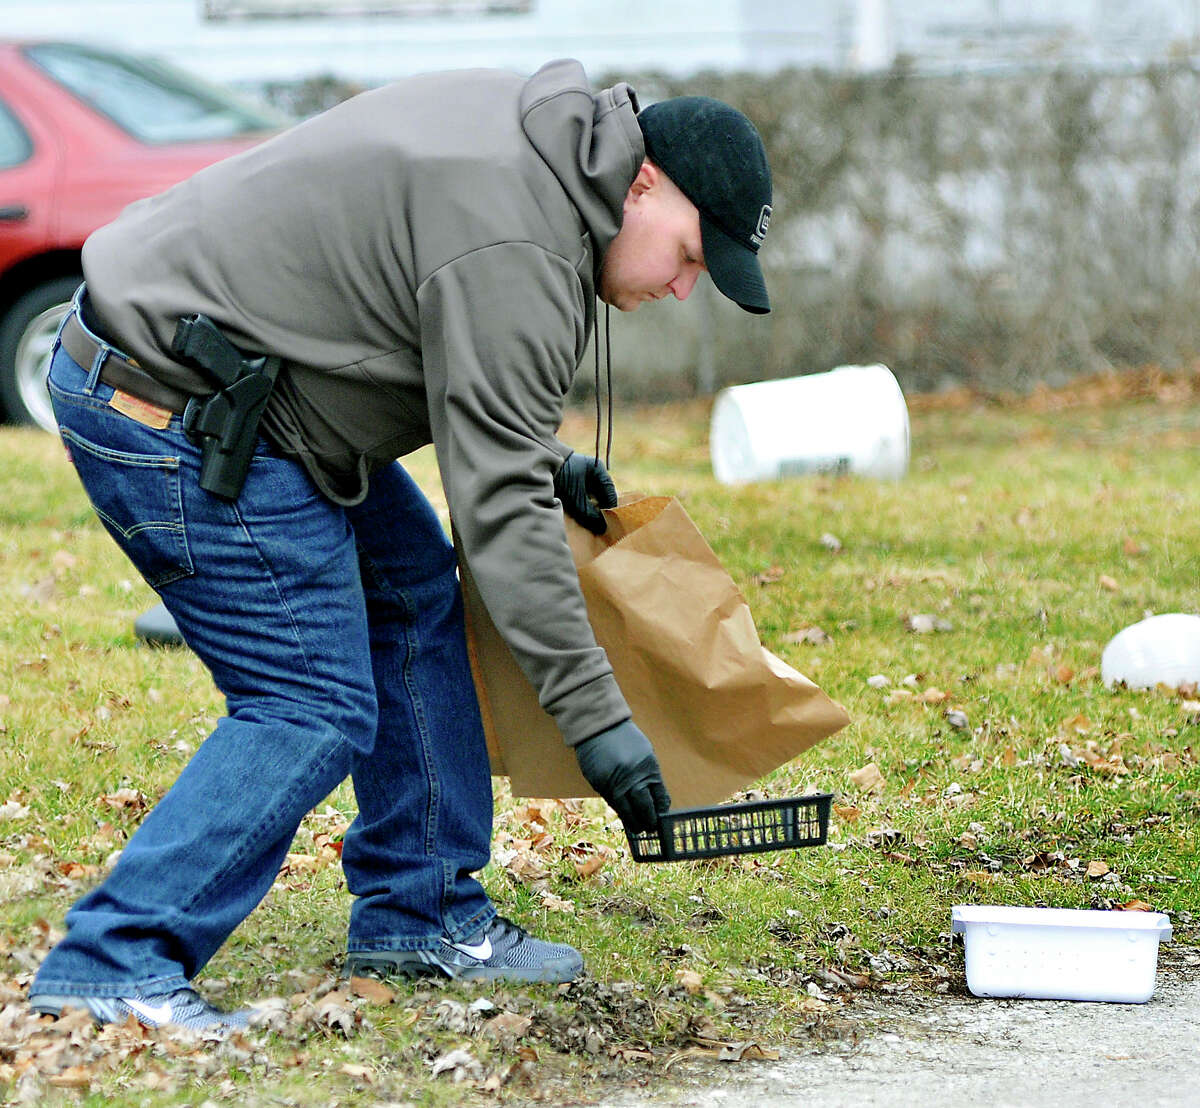 In this Jan. 25, 2017 photo, Elwood, Ind. police bag evidence as they investigate an armed robbery at Low Cost Prescriptions in Elwood, Ind., where one robbery suspect was shot and wounded by police. Law enforcement and pharmacies in Indiana are fighting back against a wave of pharmacy robberies that followed a state crackdown on opioid abuse. Those pill-robbing crimes surged in the state during 2015, when Indiana topped the nation with 168 such heists targeting painkillers and other potent drugs. (John P. Cleary /The Herald-Bulletin via AP)